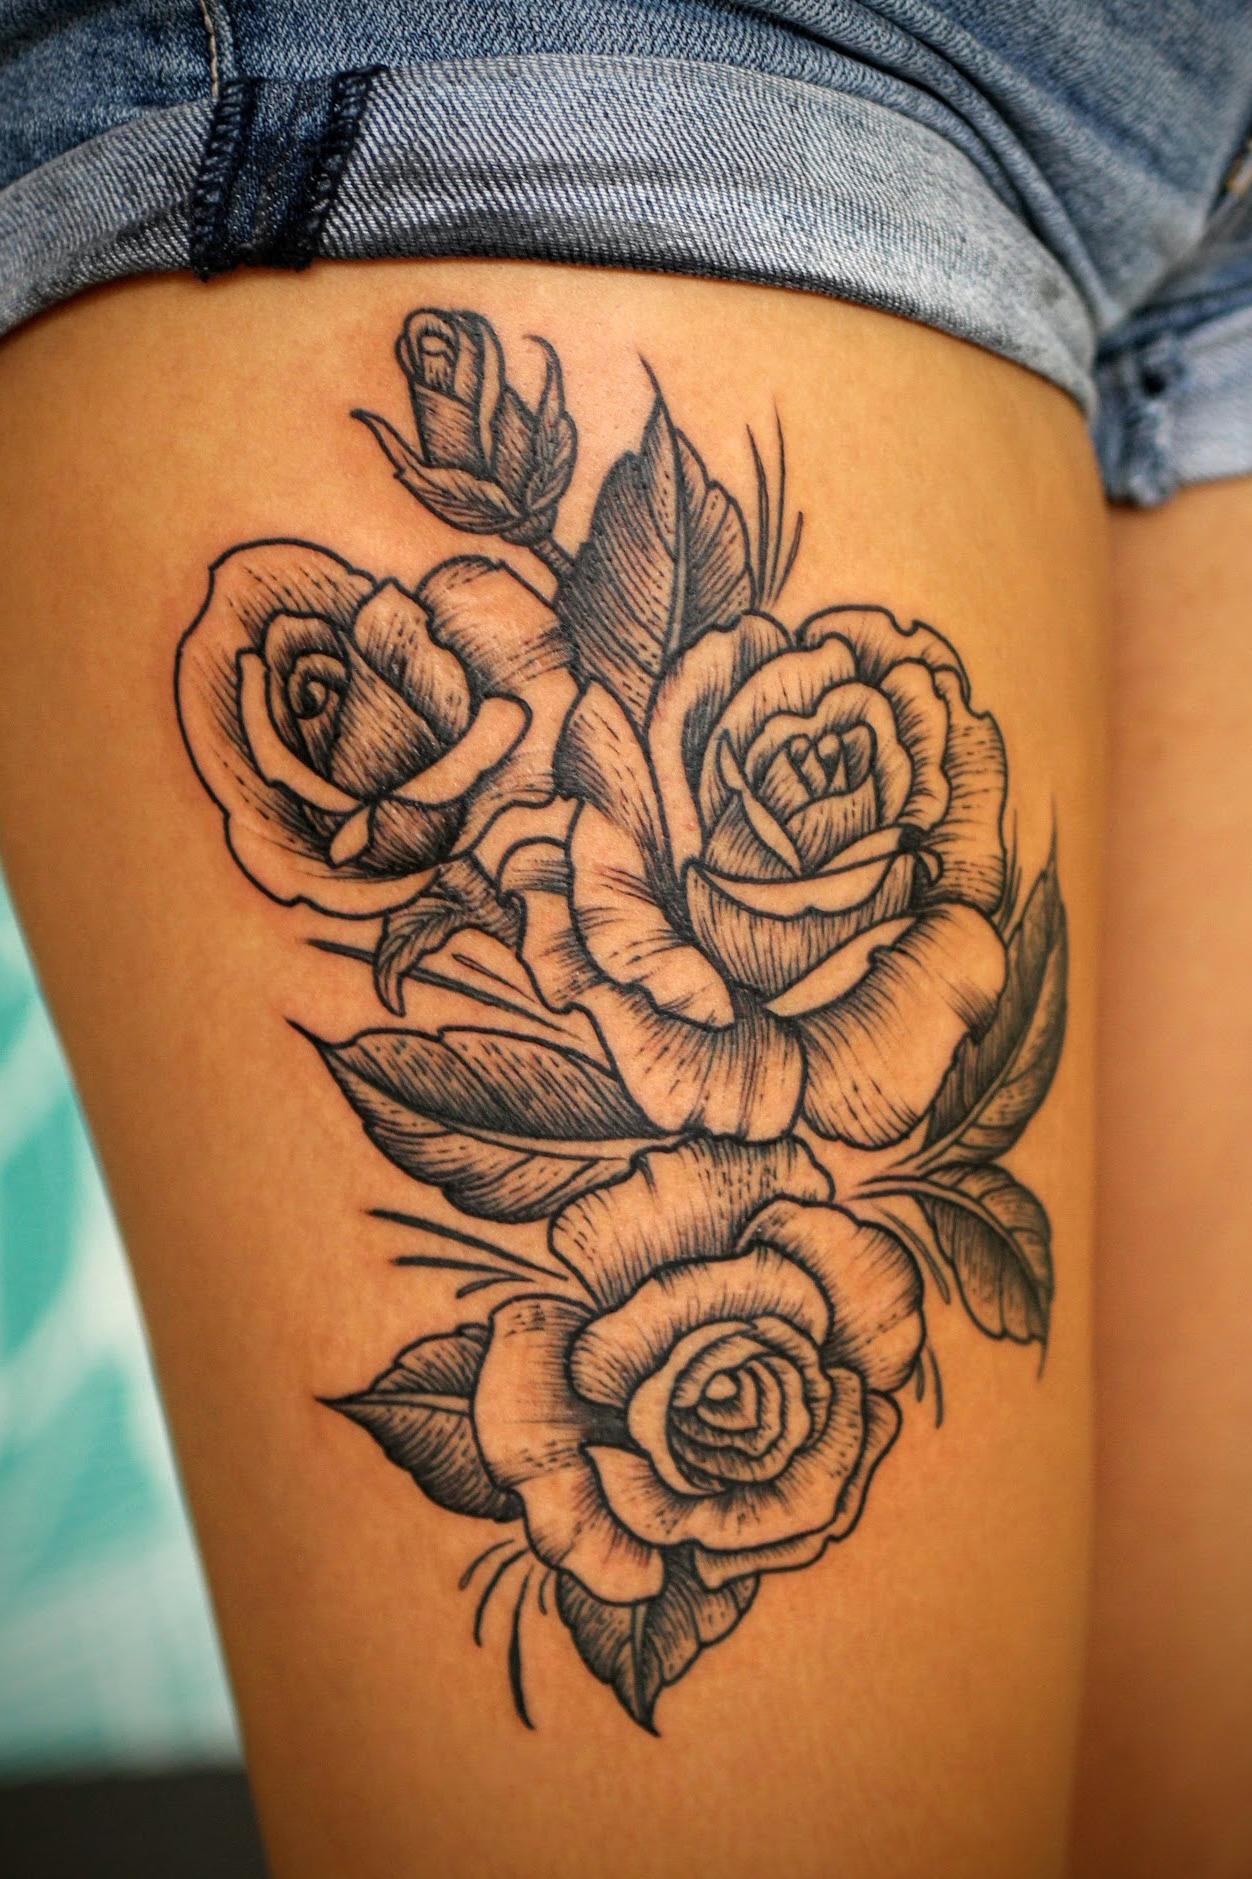 Linework Style Roses